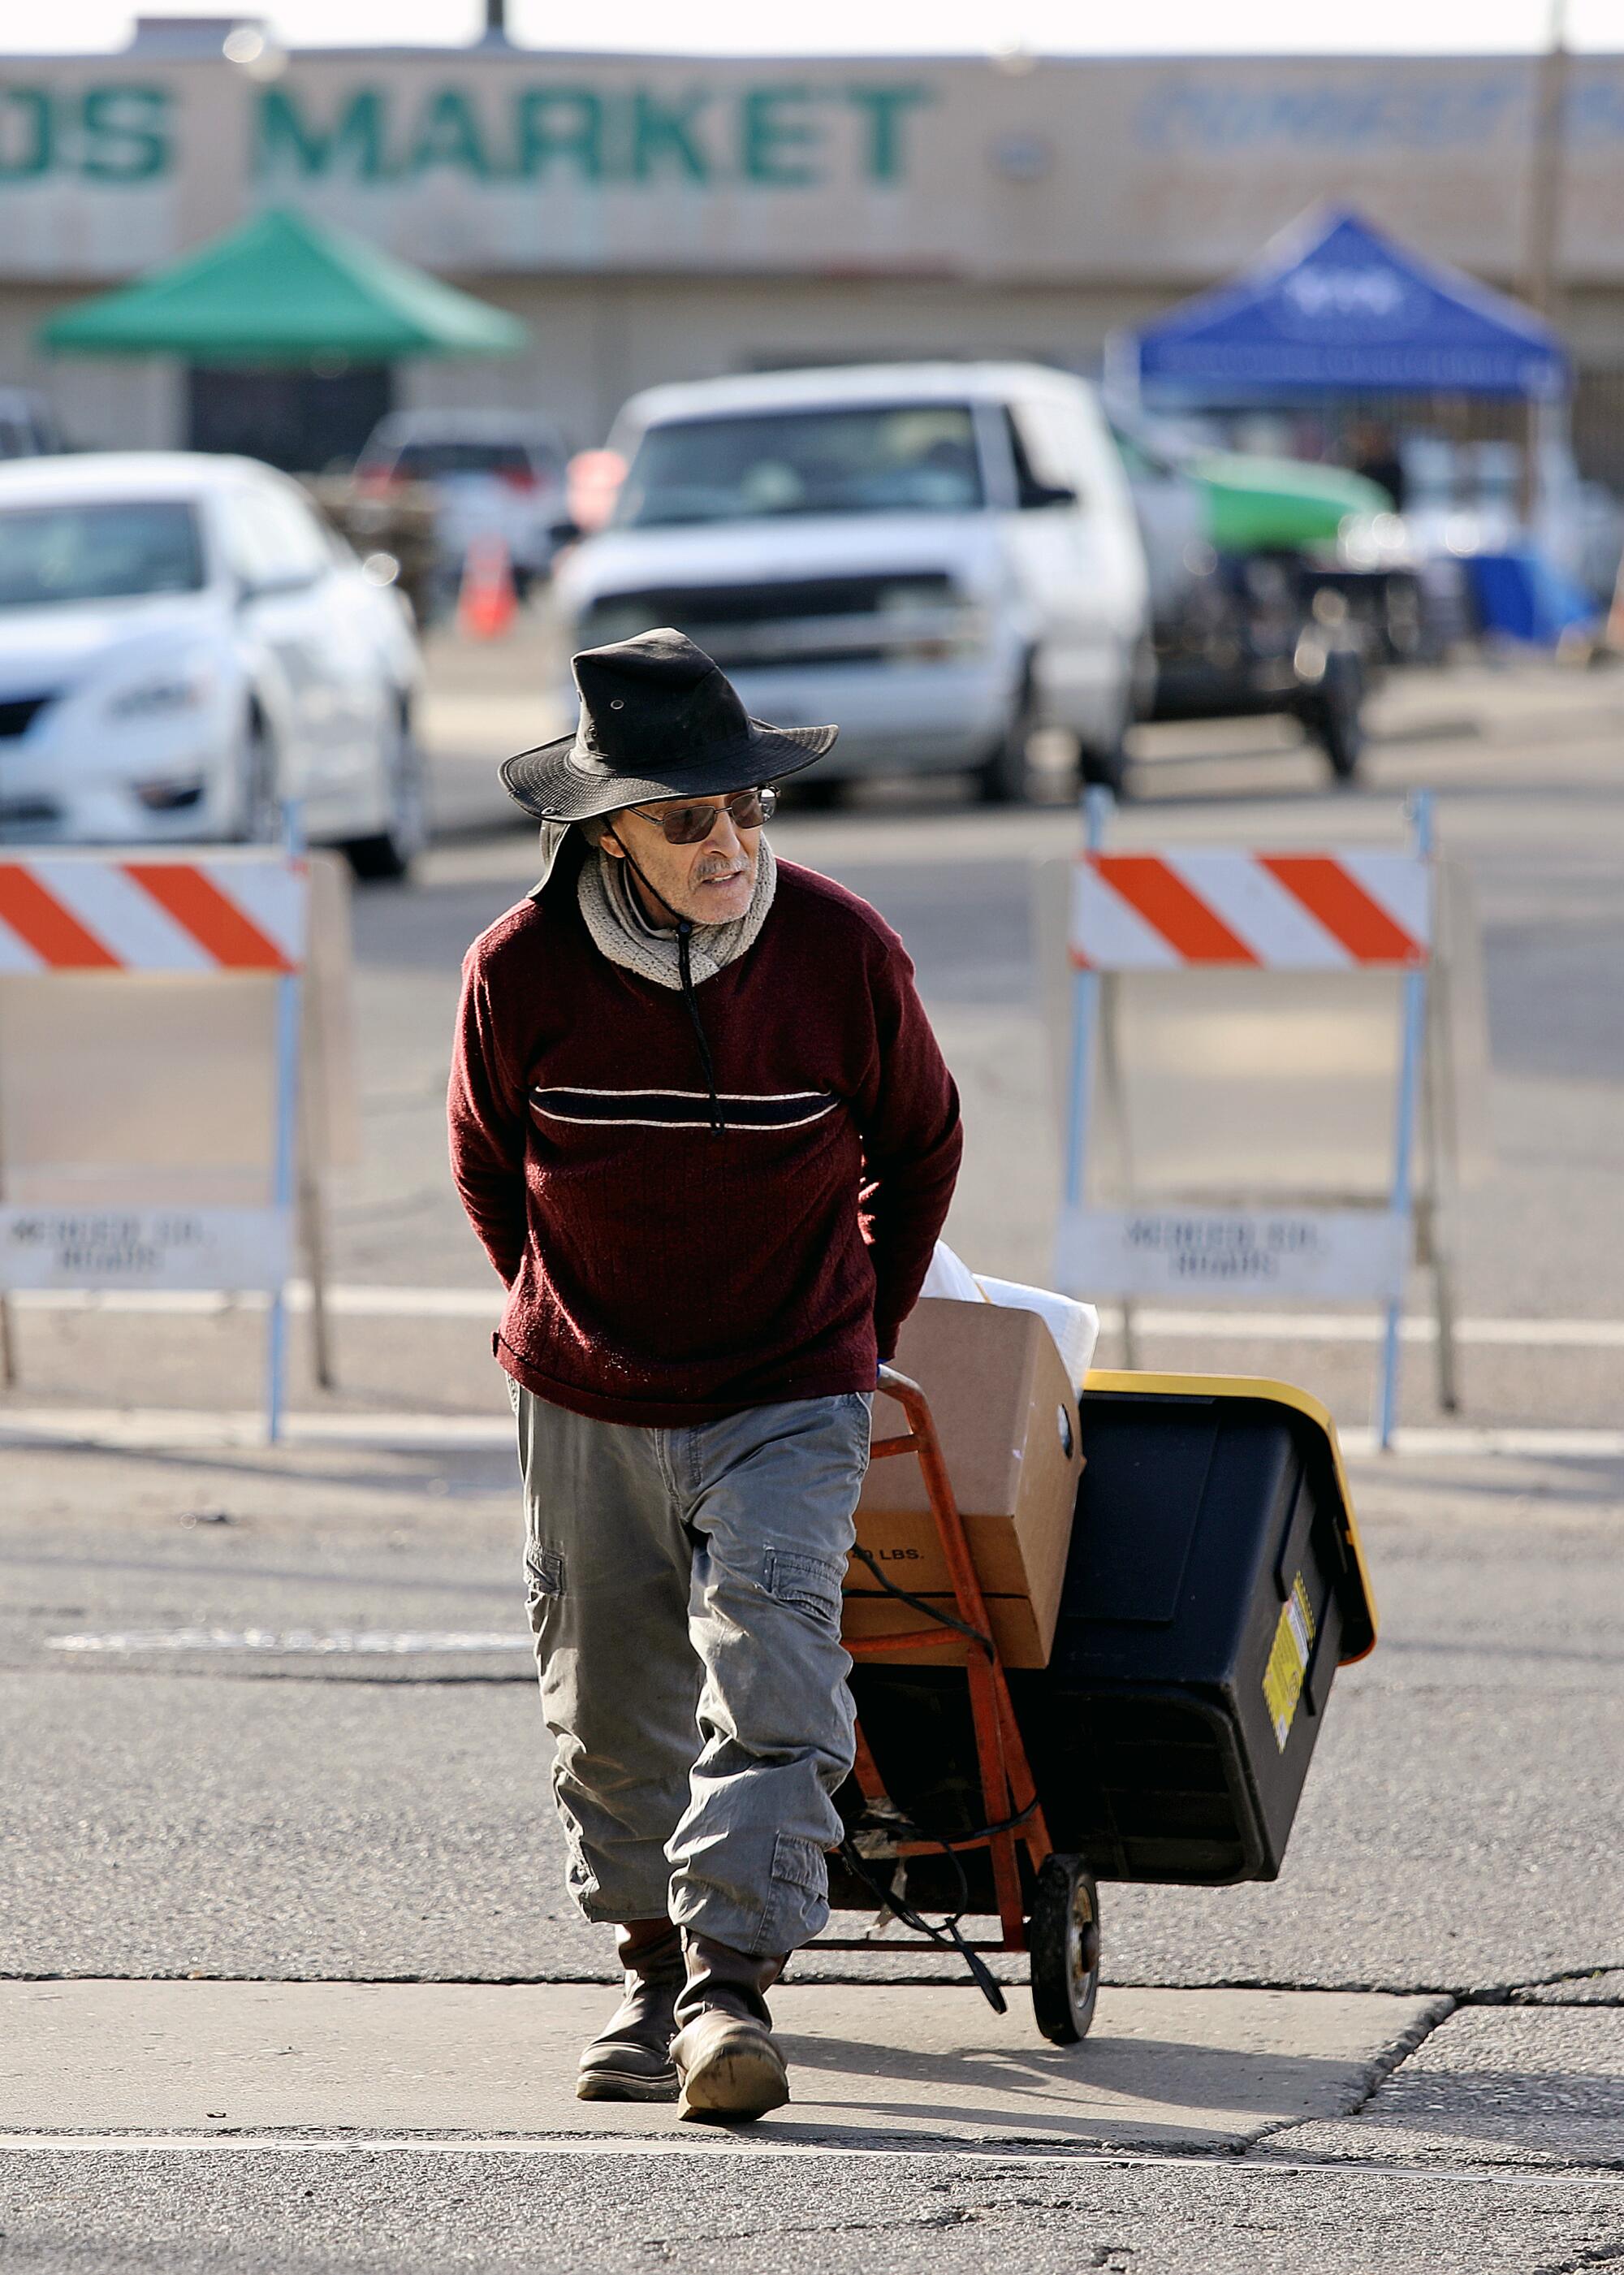 A man pulls a hand cart loaded with a box and a plastic bin across a parking lot.